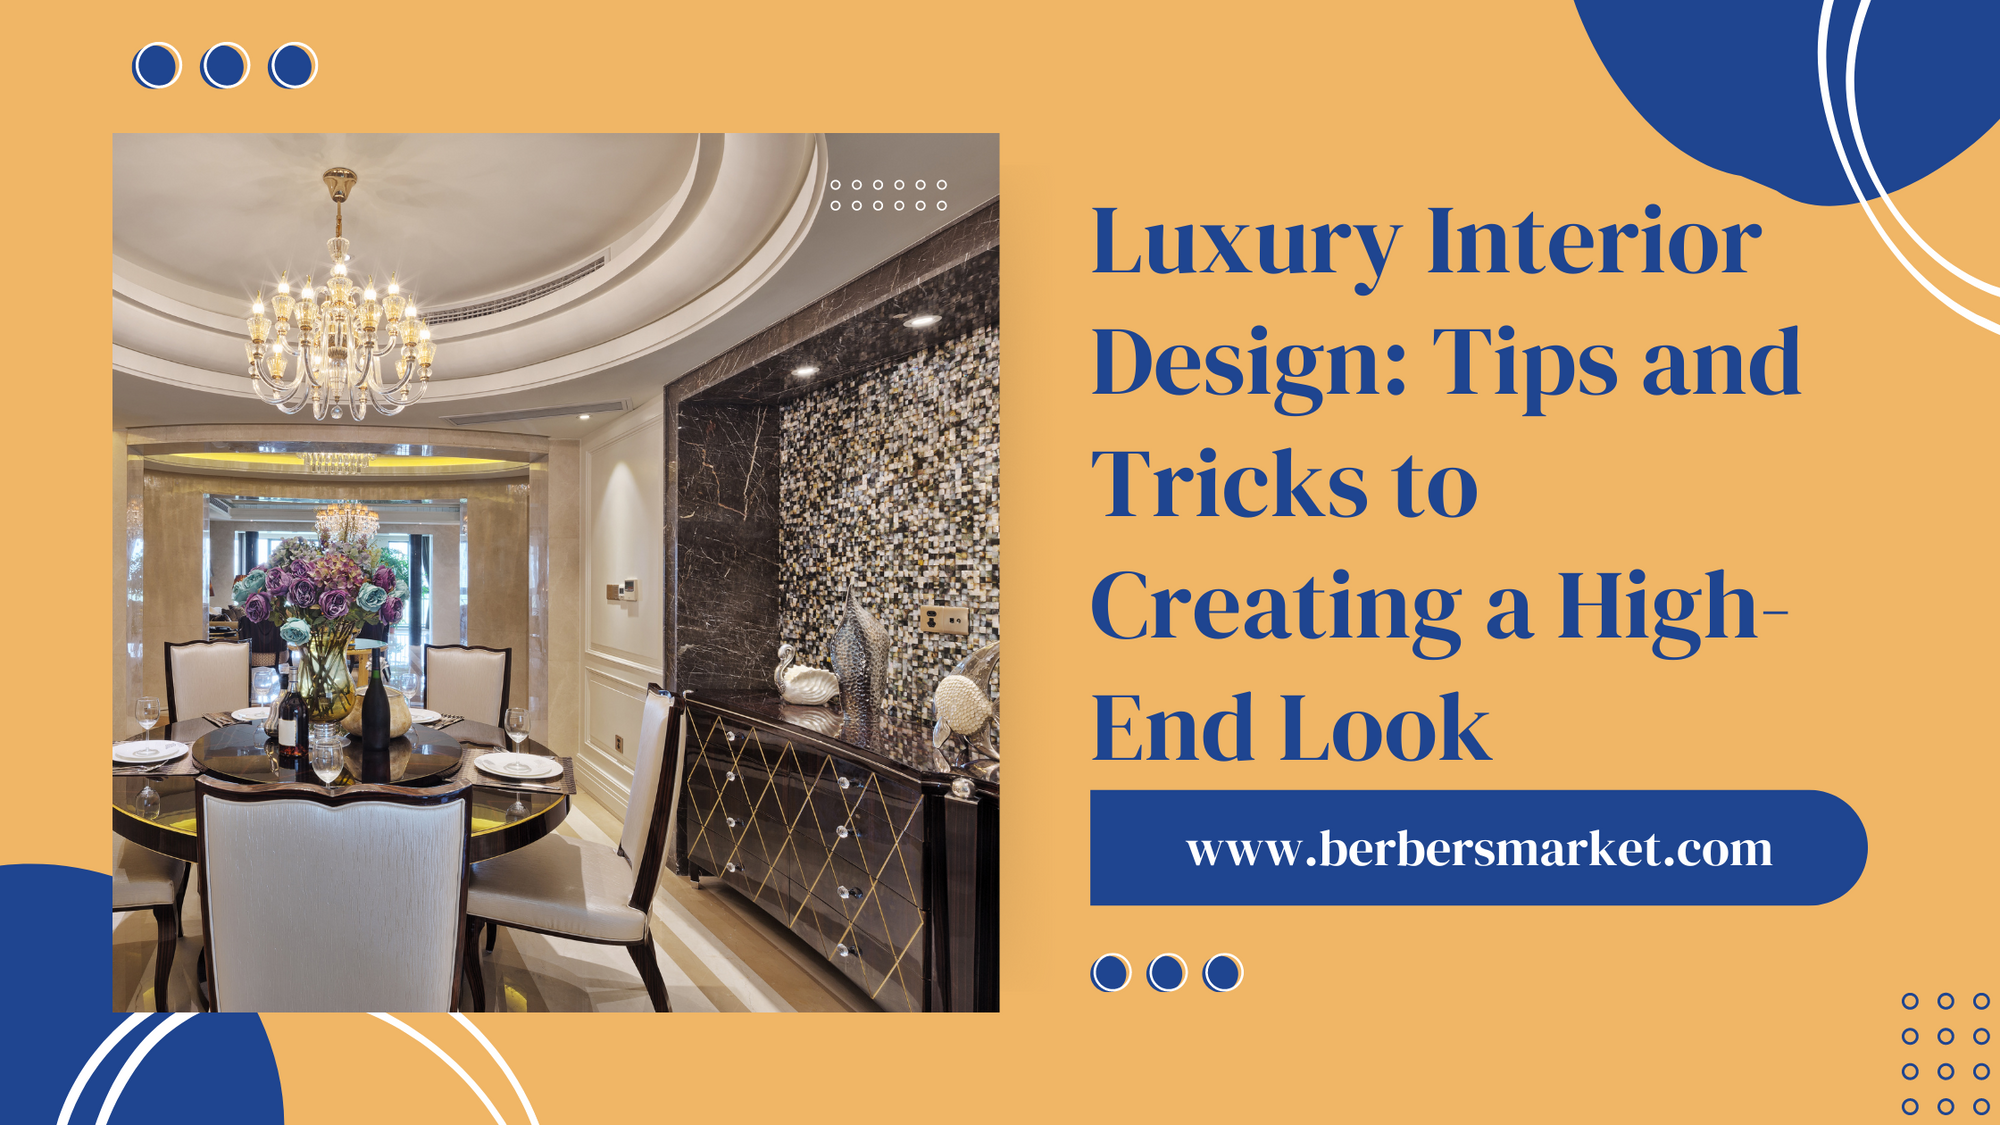 Blog banner talking about: "Luxury Interior Design: Tips and Tricks to Creating a High-End Look" with a picture showing a Luxury dining room interior design.